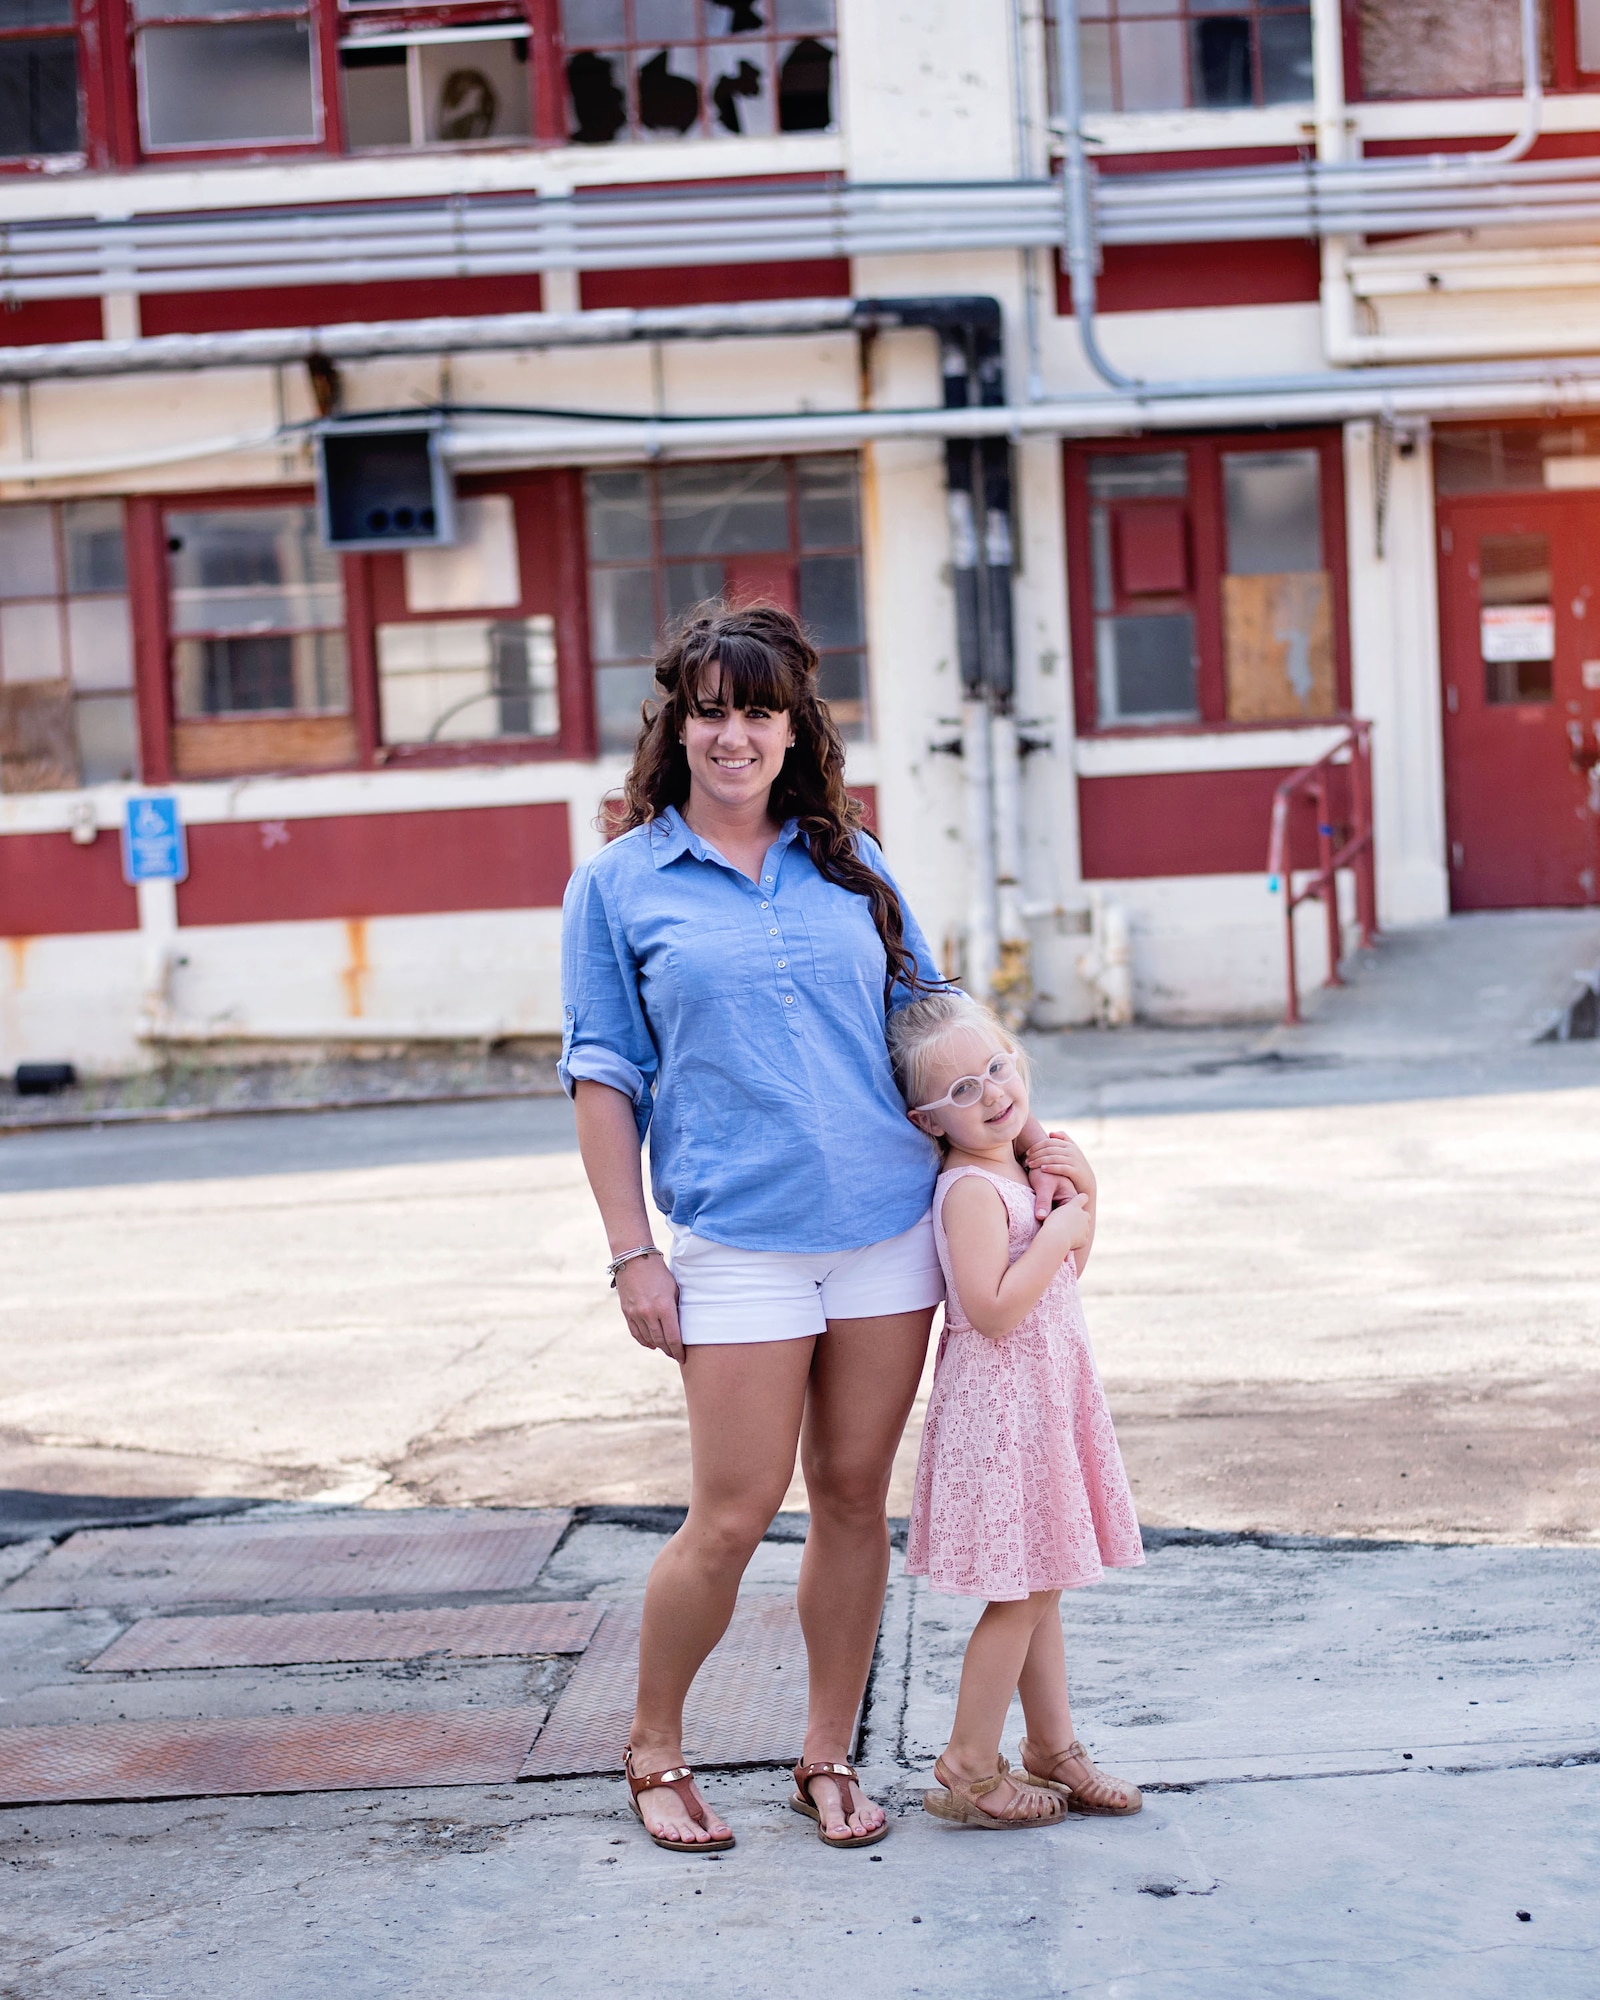 U.S. Air Force Staff Sgt. Amanda Scheer, 60th Contracting Squadron contracting specialist, and her daughter, Paisley, pose for a photo in Vallejo, California., Aug. 20, 2017. Scheer is a single mother and has served in the Air Force for six years. (Courtesy photo by Valerie Ozella)